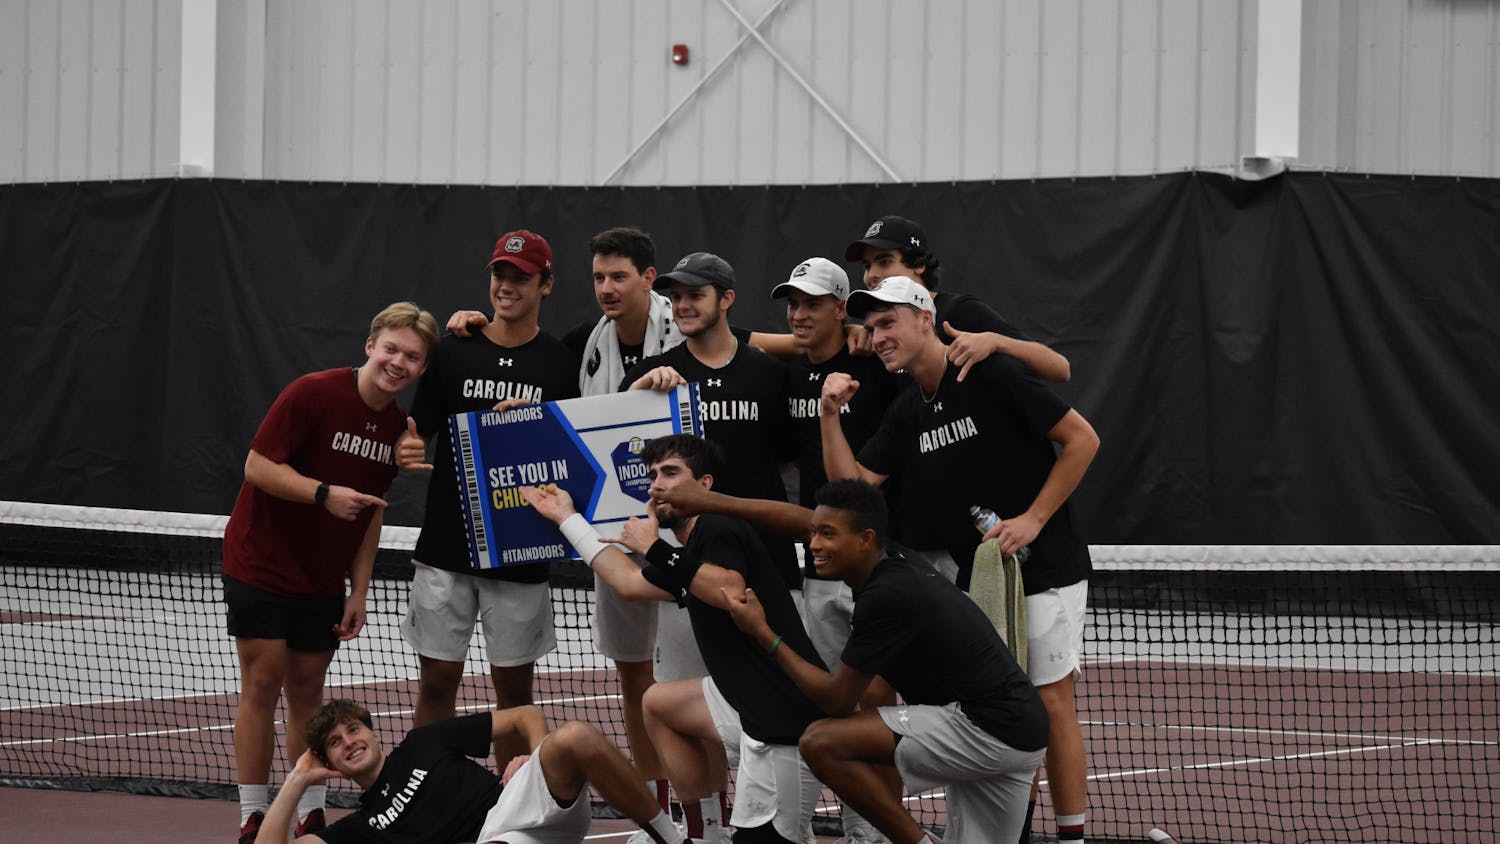 South Carolina’s men’s tennis team poses together with the ITA tournament sign after winning the ITA Kickoff Weekend event at the Carolina Indoor Tennis Center on Jan. 29, 2023. The South Carolina Gamecocks beat N.C. State 4-0.&nbsp;